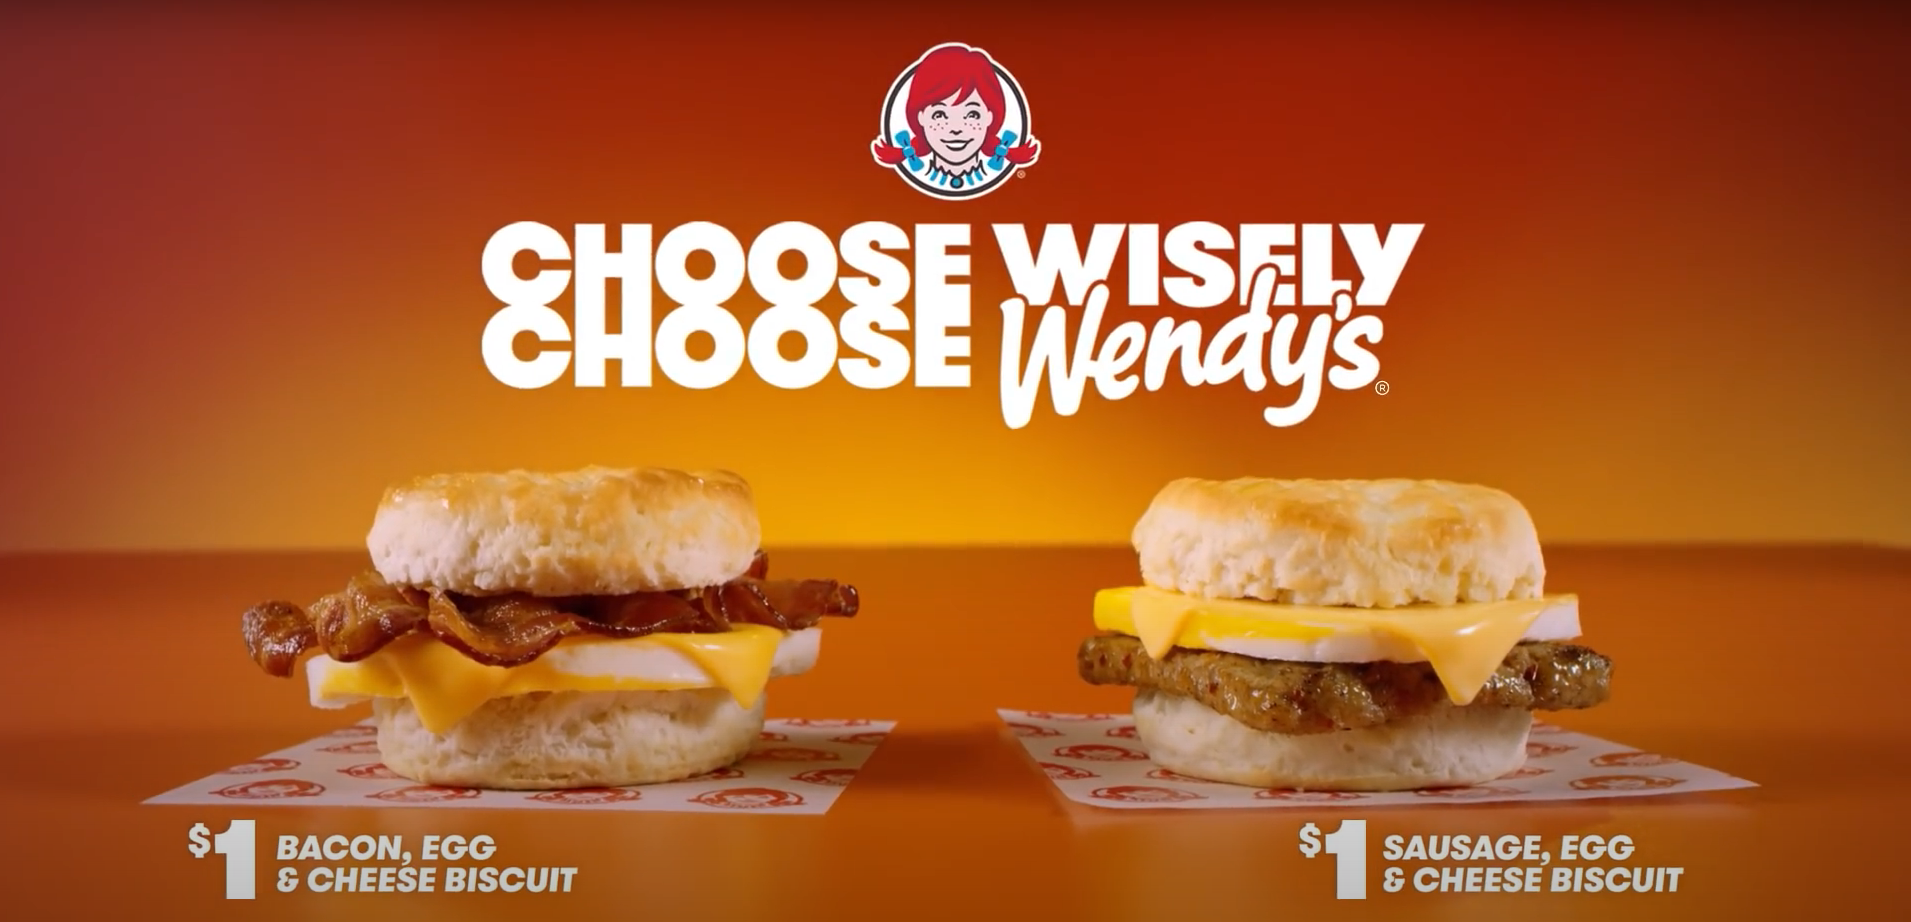 WENDY'S - Hot & Buttery Breakfast Biscuits